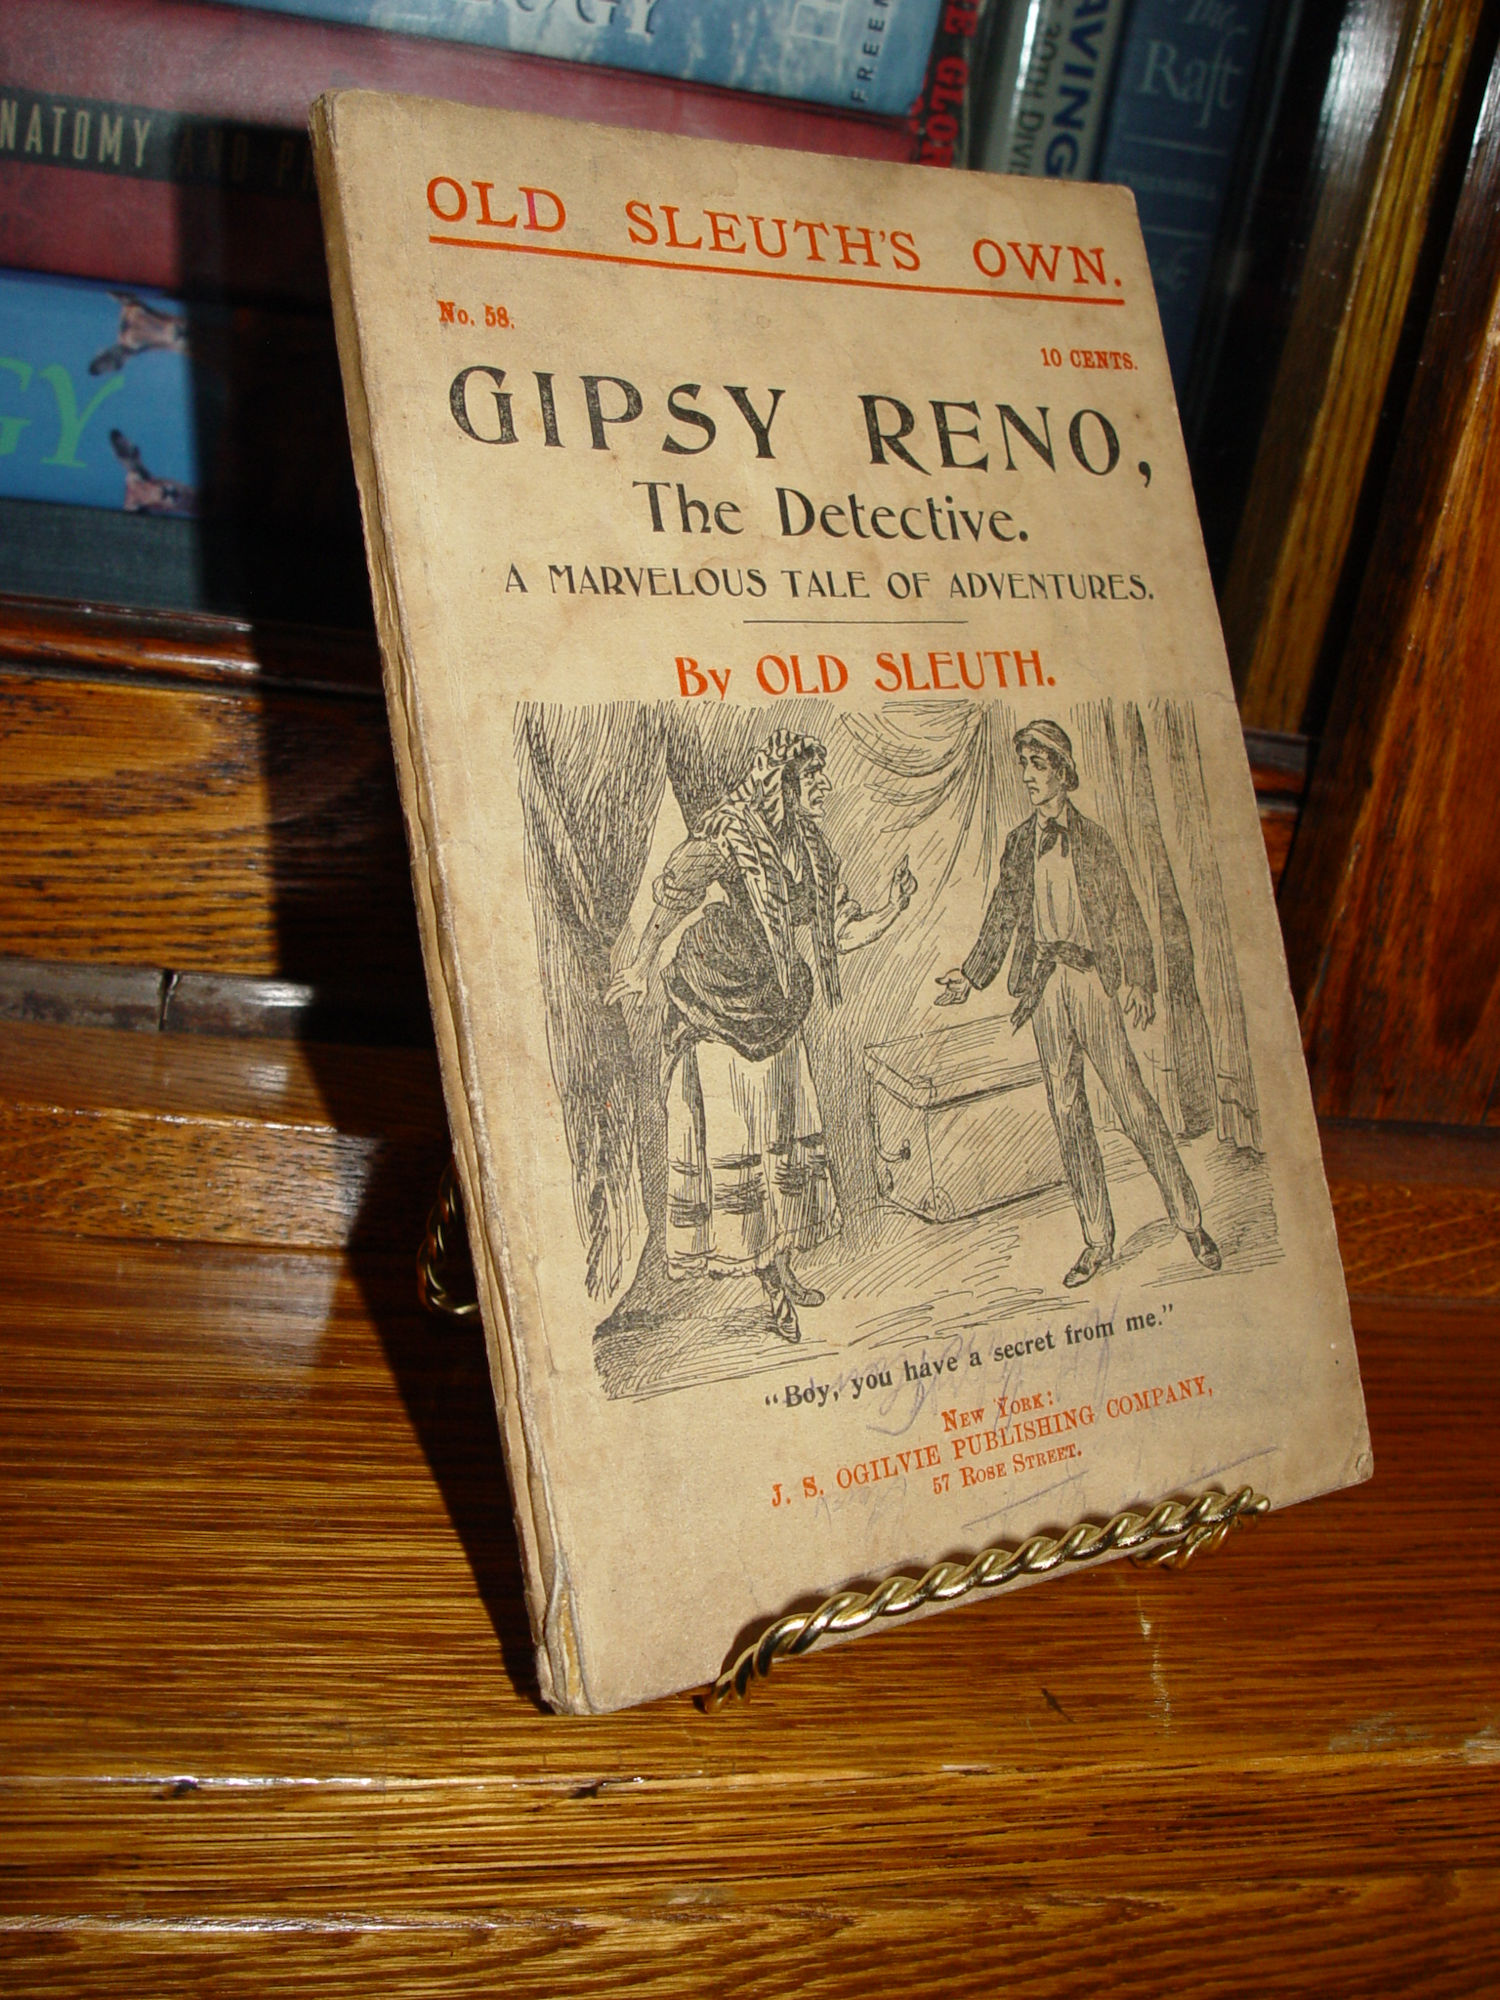 Gipsy Reno, The Detective by Old Sleuth -
                        No 58 Pulp Dime Novel